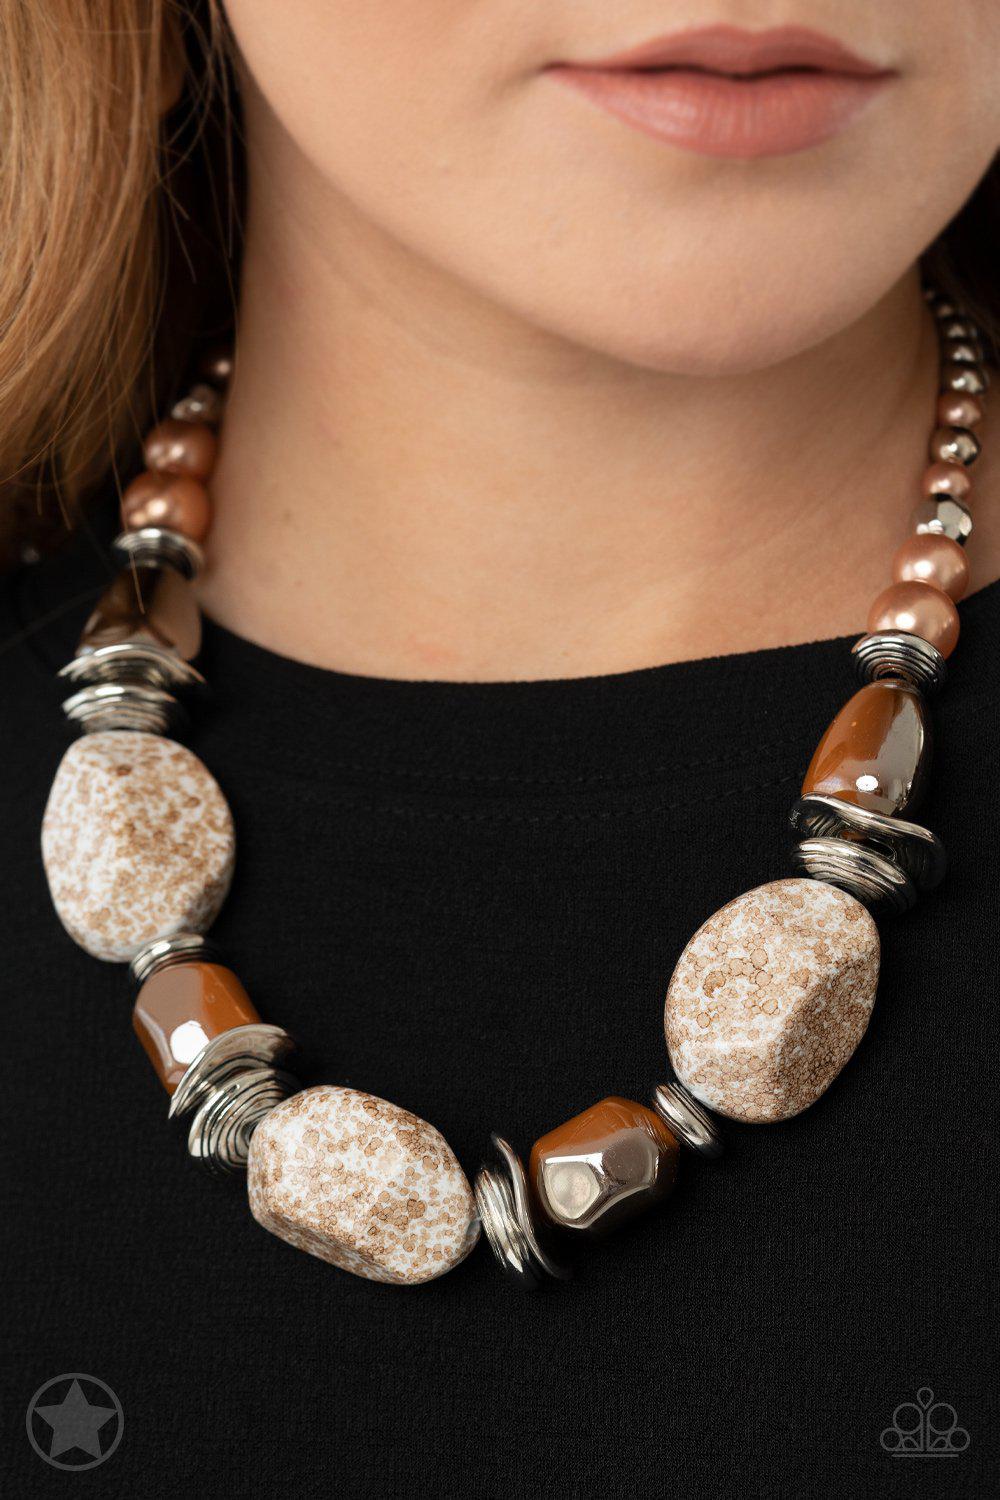 In Good Glazes Chunky Peach Necklace and matching Earrings - Paparazzi Accessories - model -CarasShop.com - $5 Jewelry by Cara Jewels